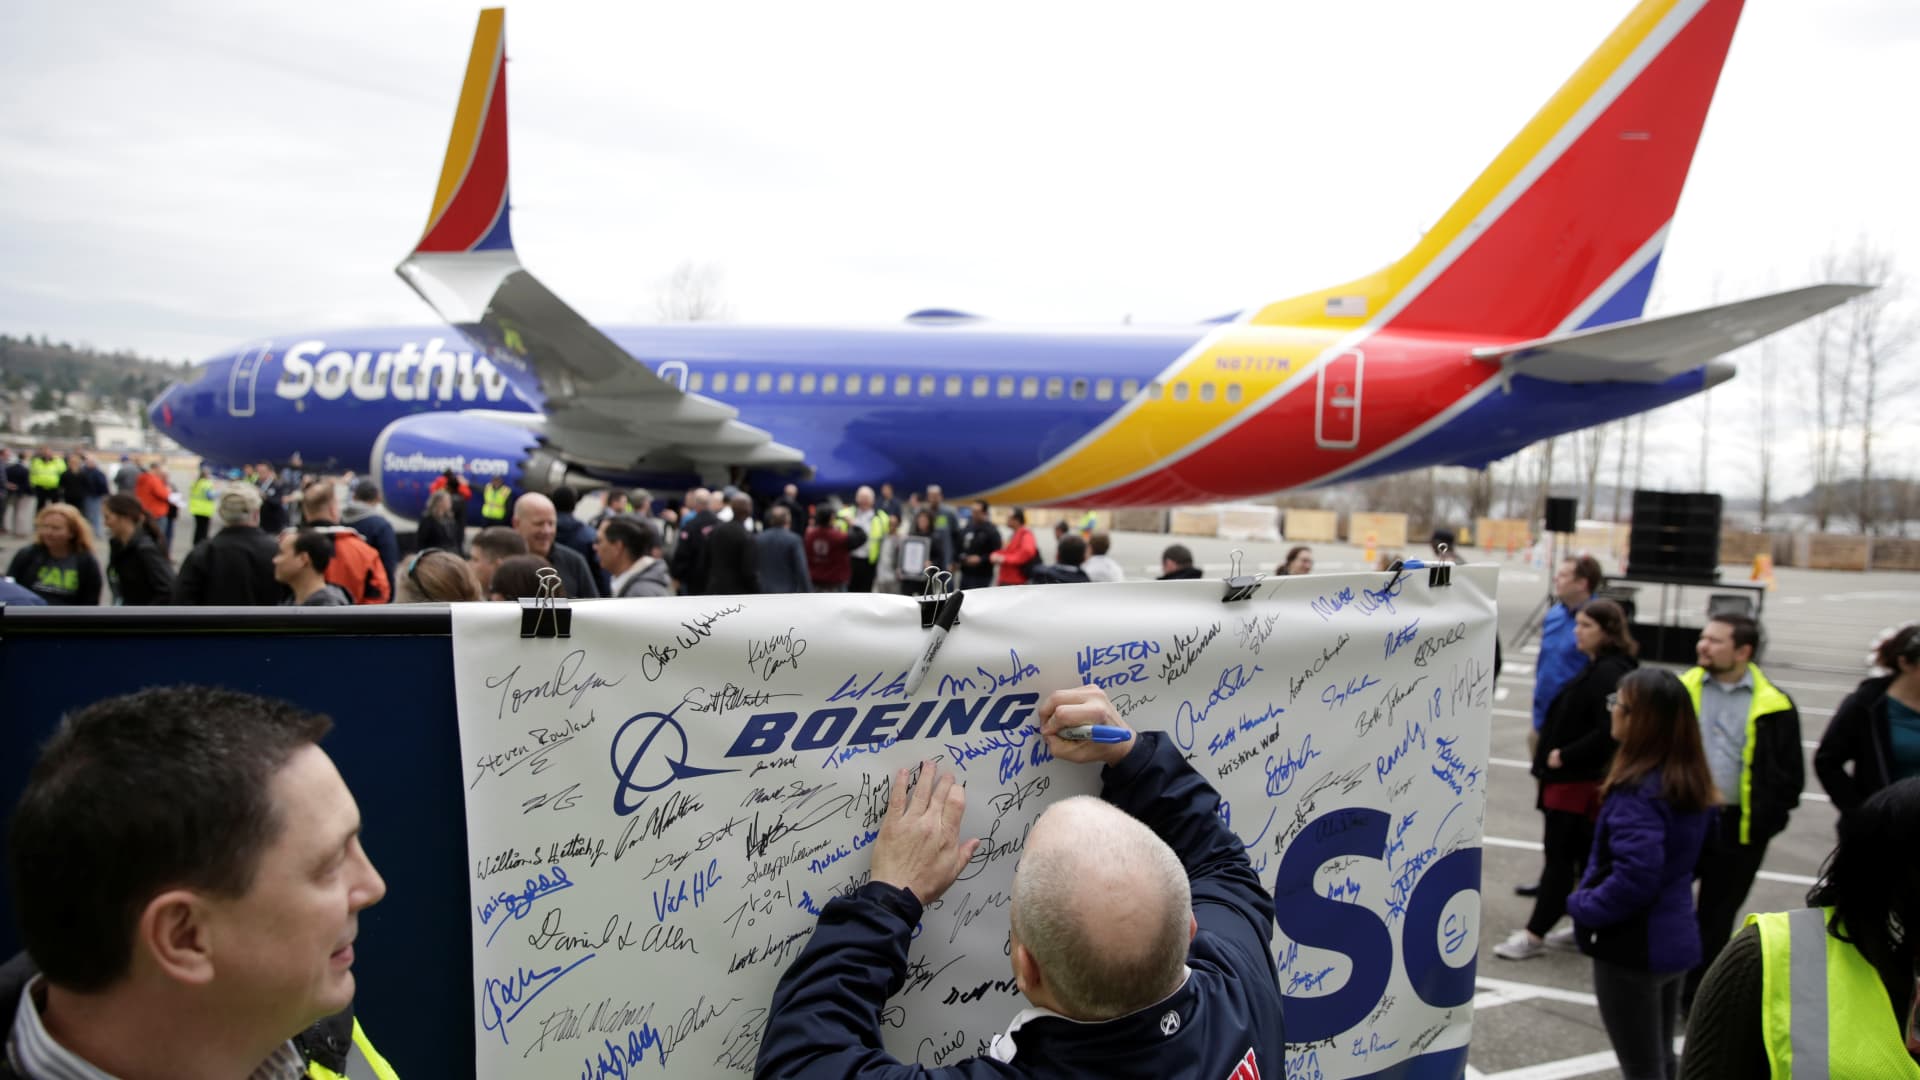 Southwest says Boeing’s aircraft delays will pressure the airline to reduce inspire hiring plans